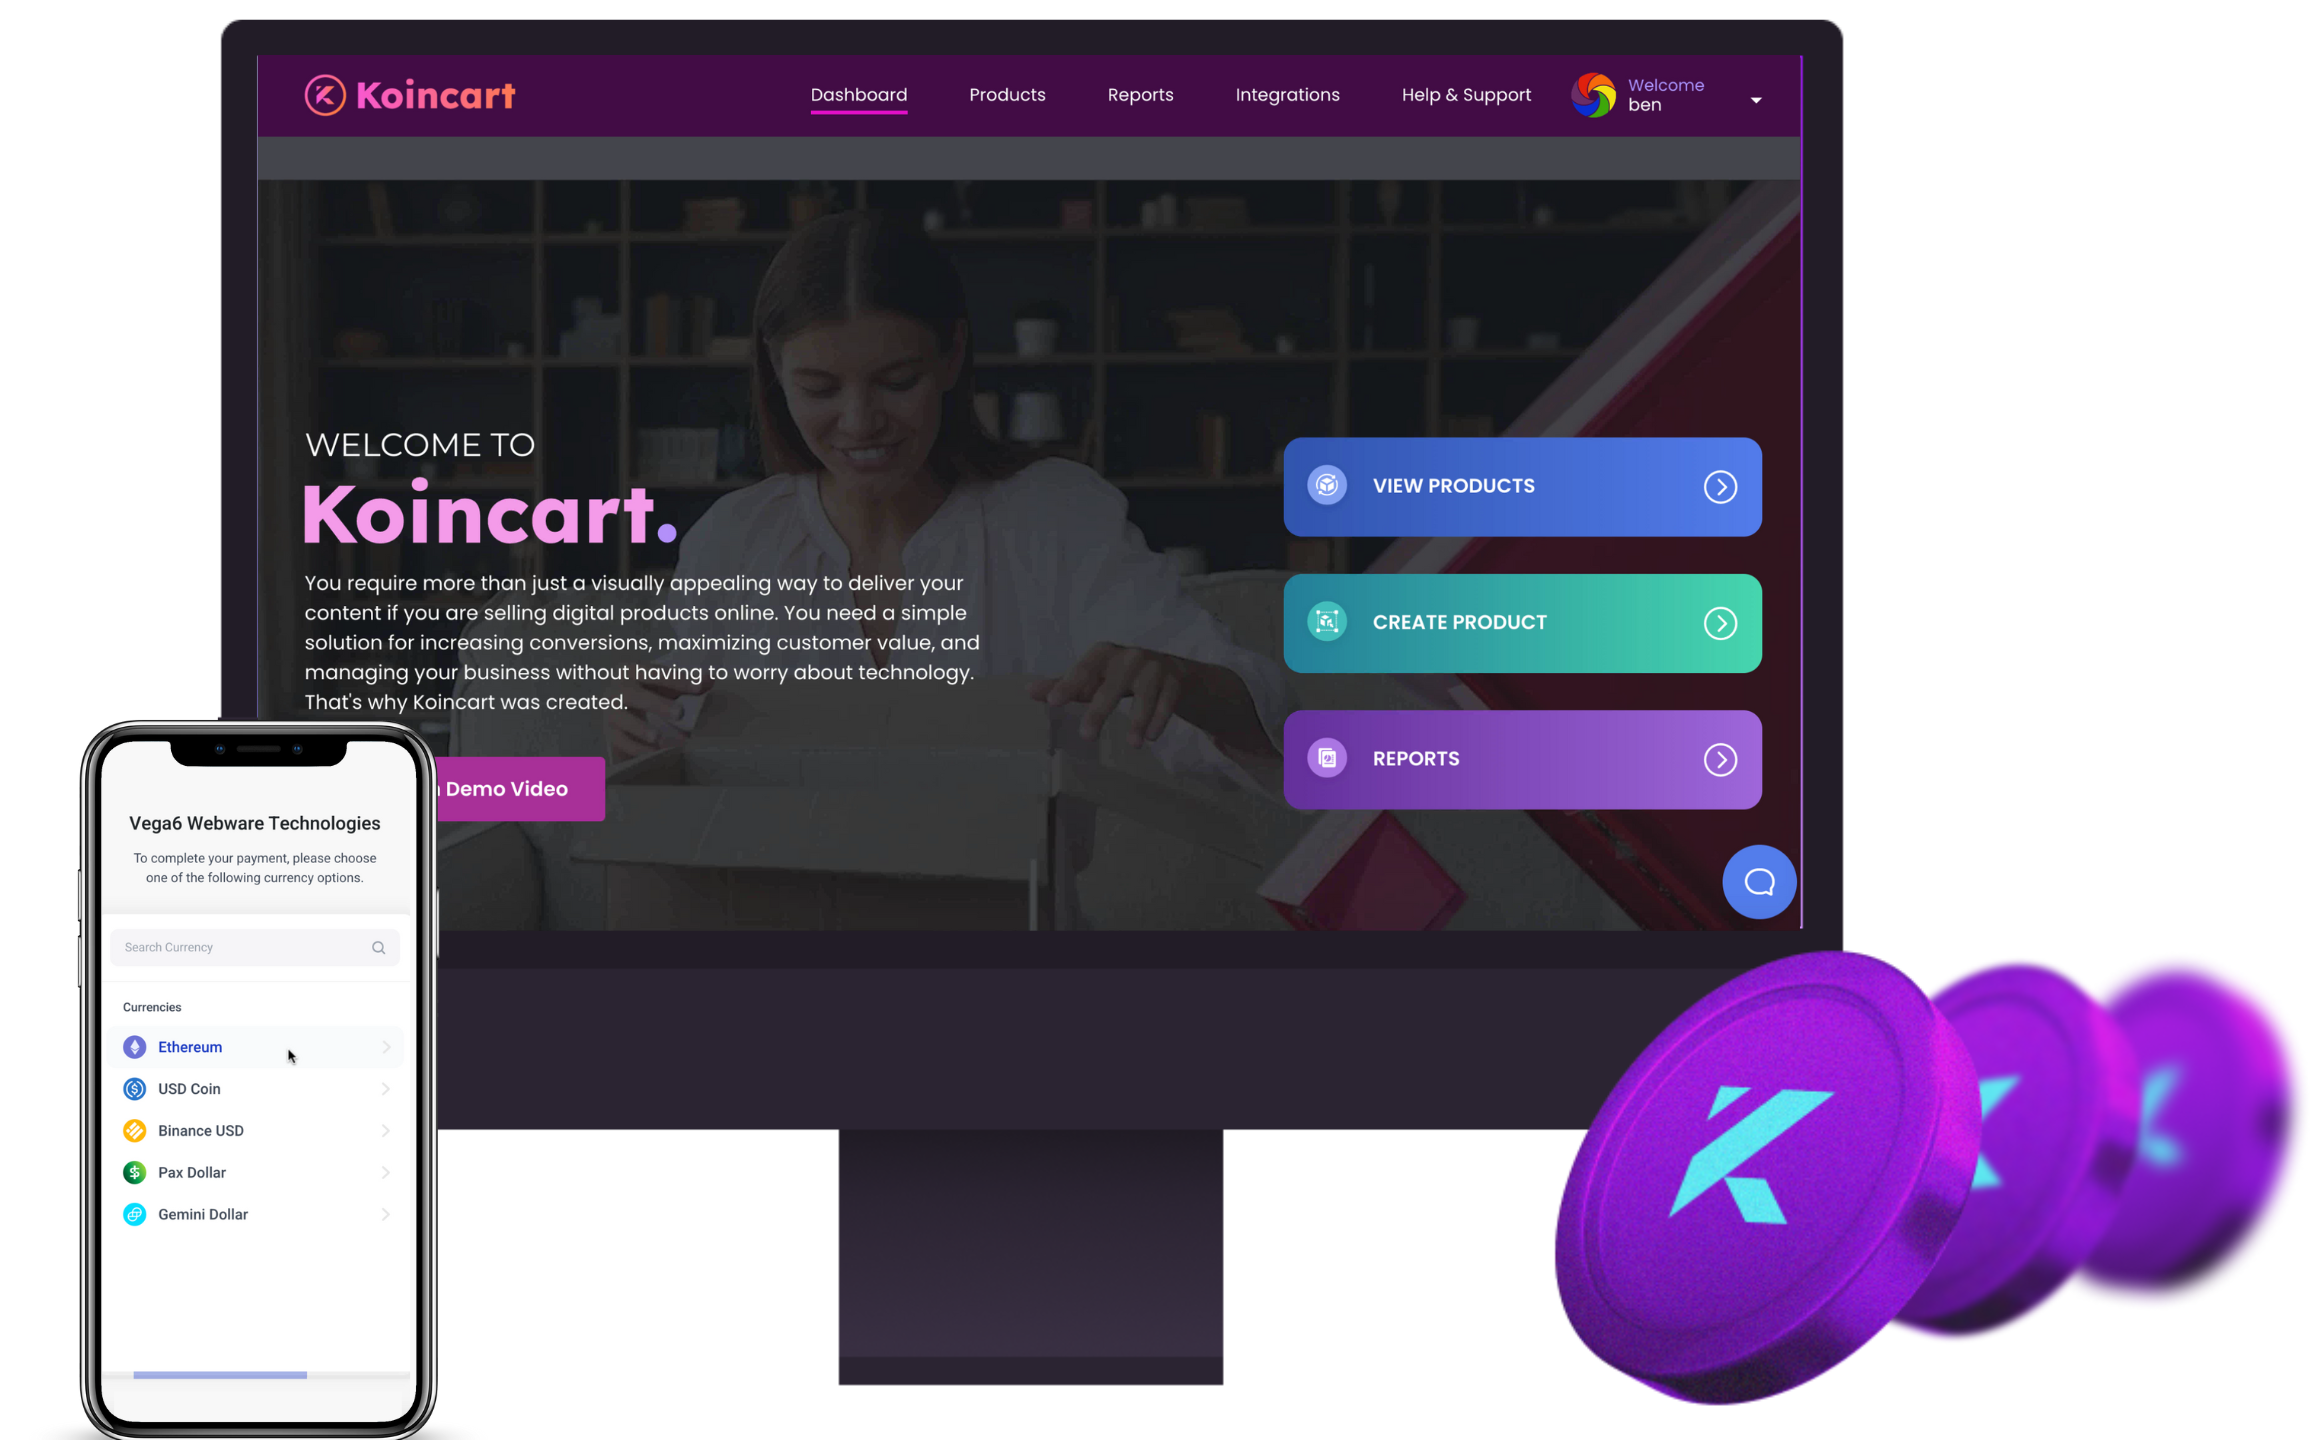 KoinCart Review – Best #1 App Is The Biggest Agency Opportunity in 20 Years? Evolutionary App Sells Any Product with Cryptocurrency Checkout Handsfree. Make Easy Sales Helping Small Businesses Sell Products with Cryptocurrency Checkout – No Crypto Knowledge Needed!